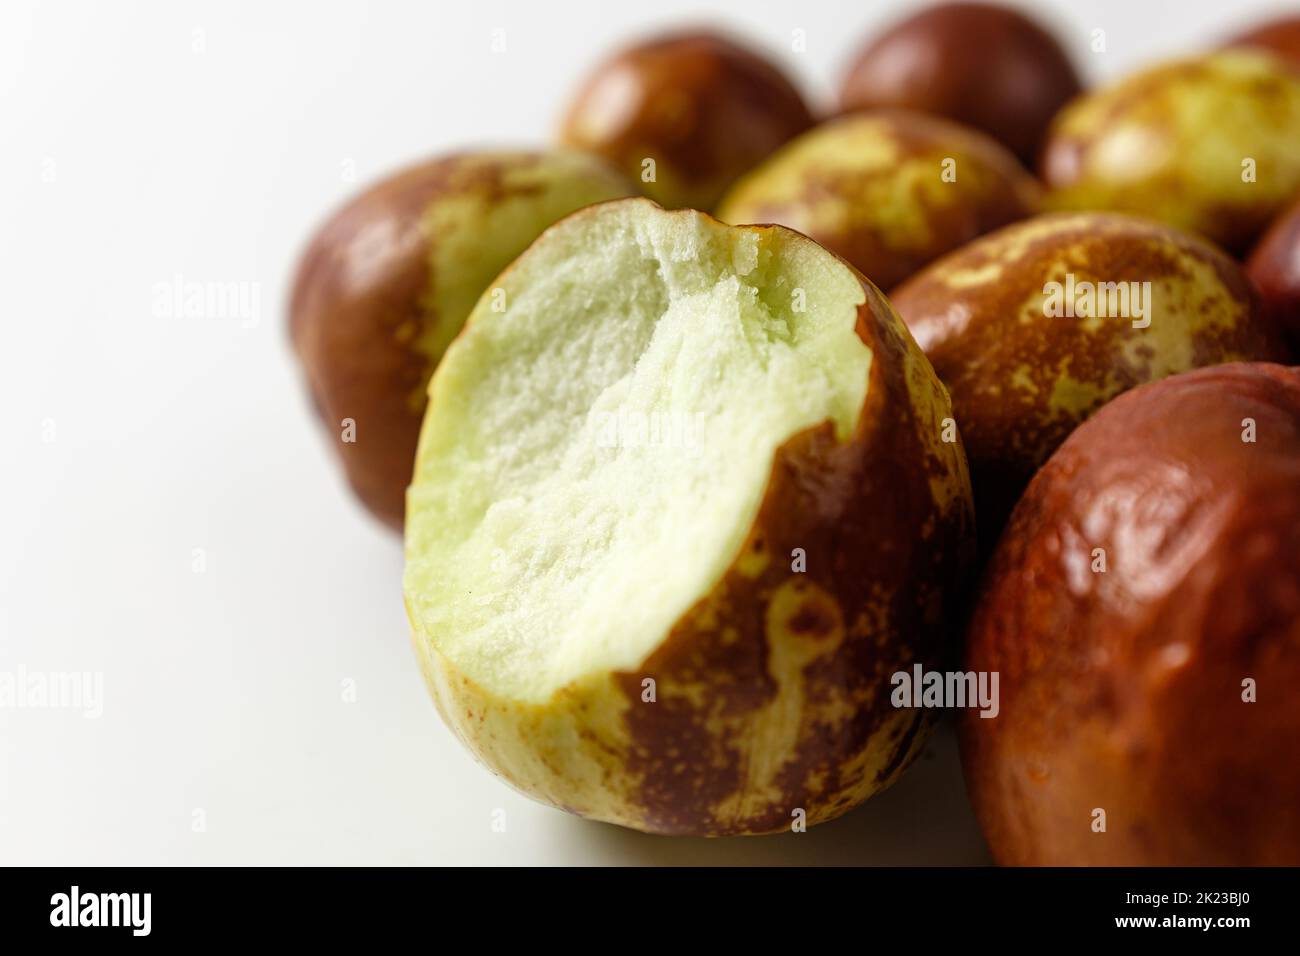 sweet fruit. fruit in a round shape. fruits eaten in asia Stock Photo